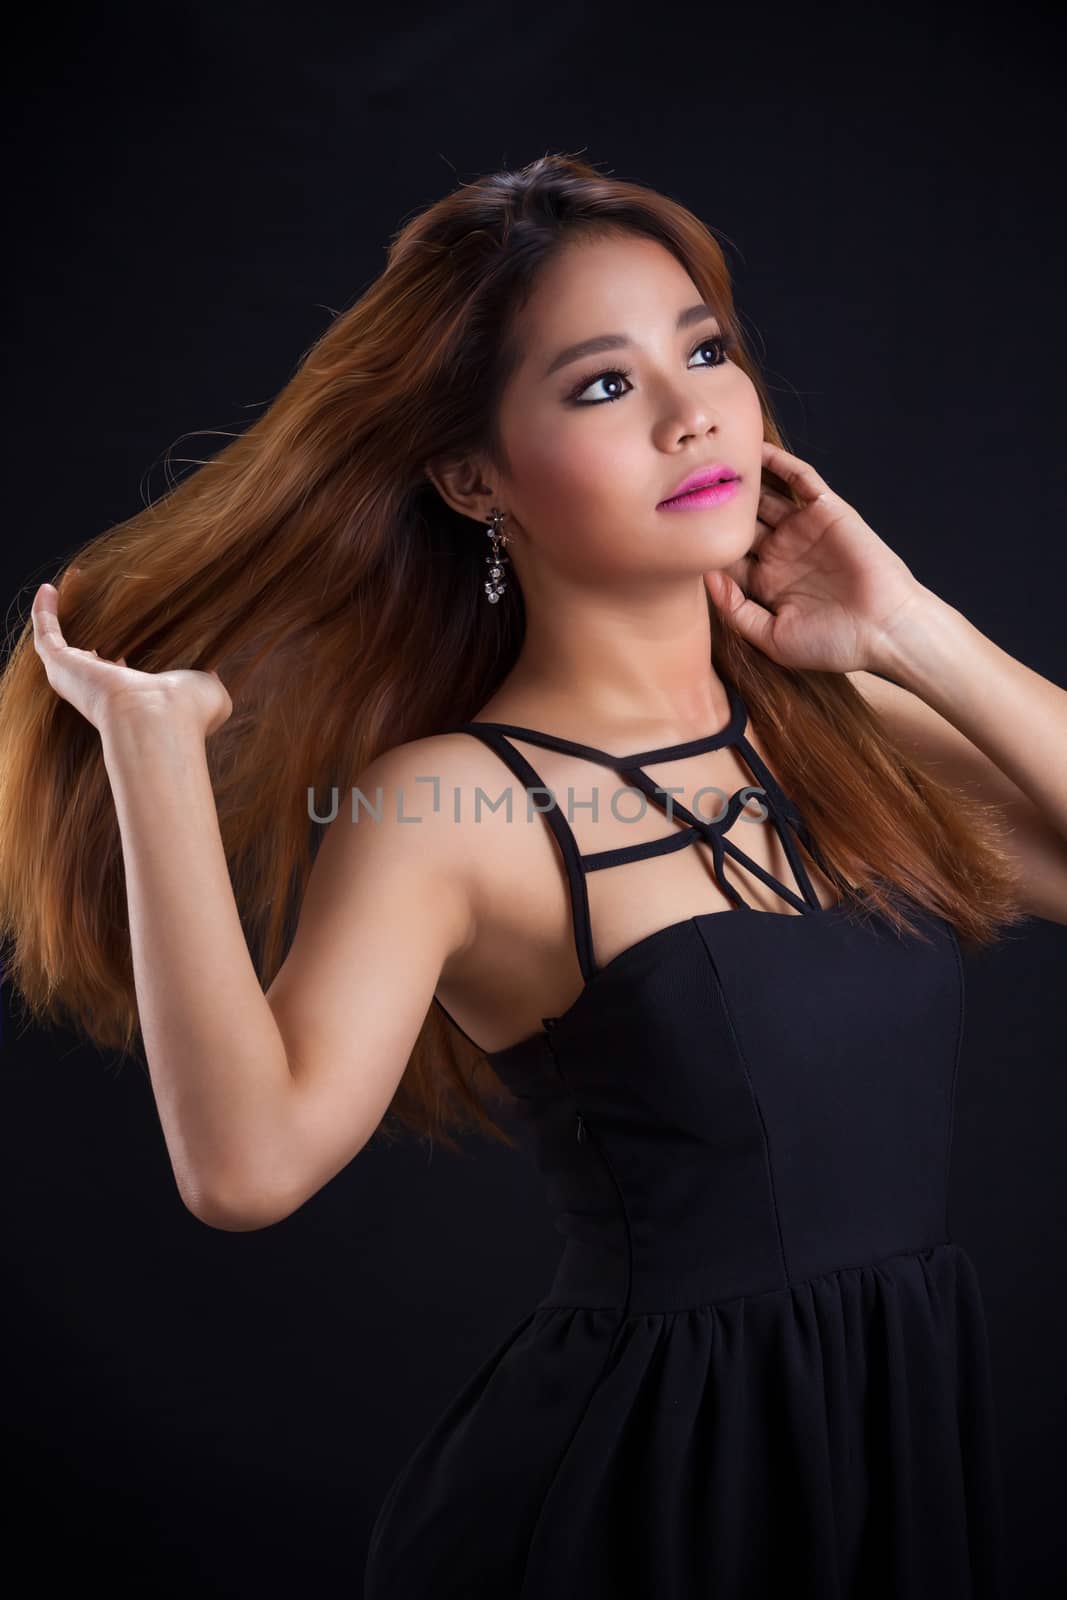 Portrait of young Asian girl - sexy, pretty dress